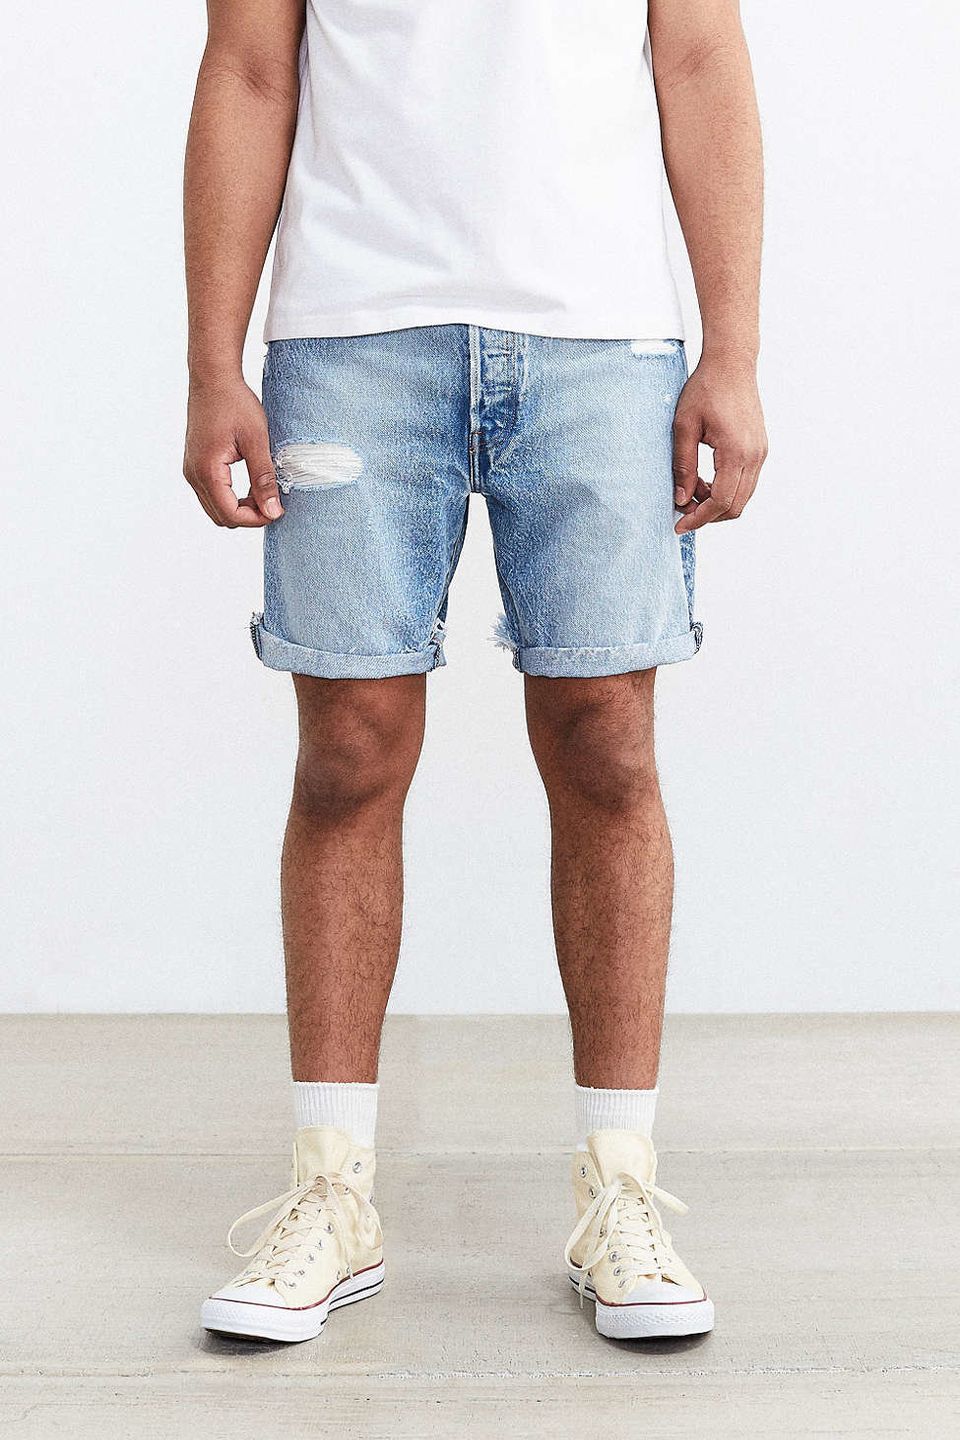 The Everything Guide To Wearing Shorts And Socks For Men